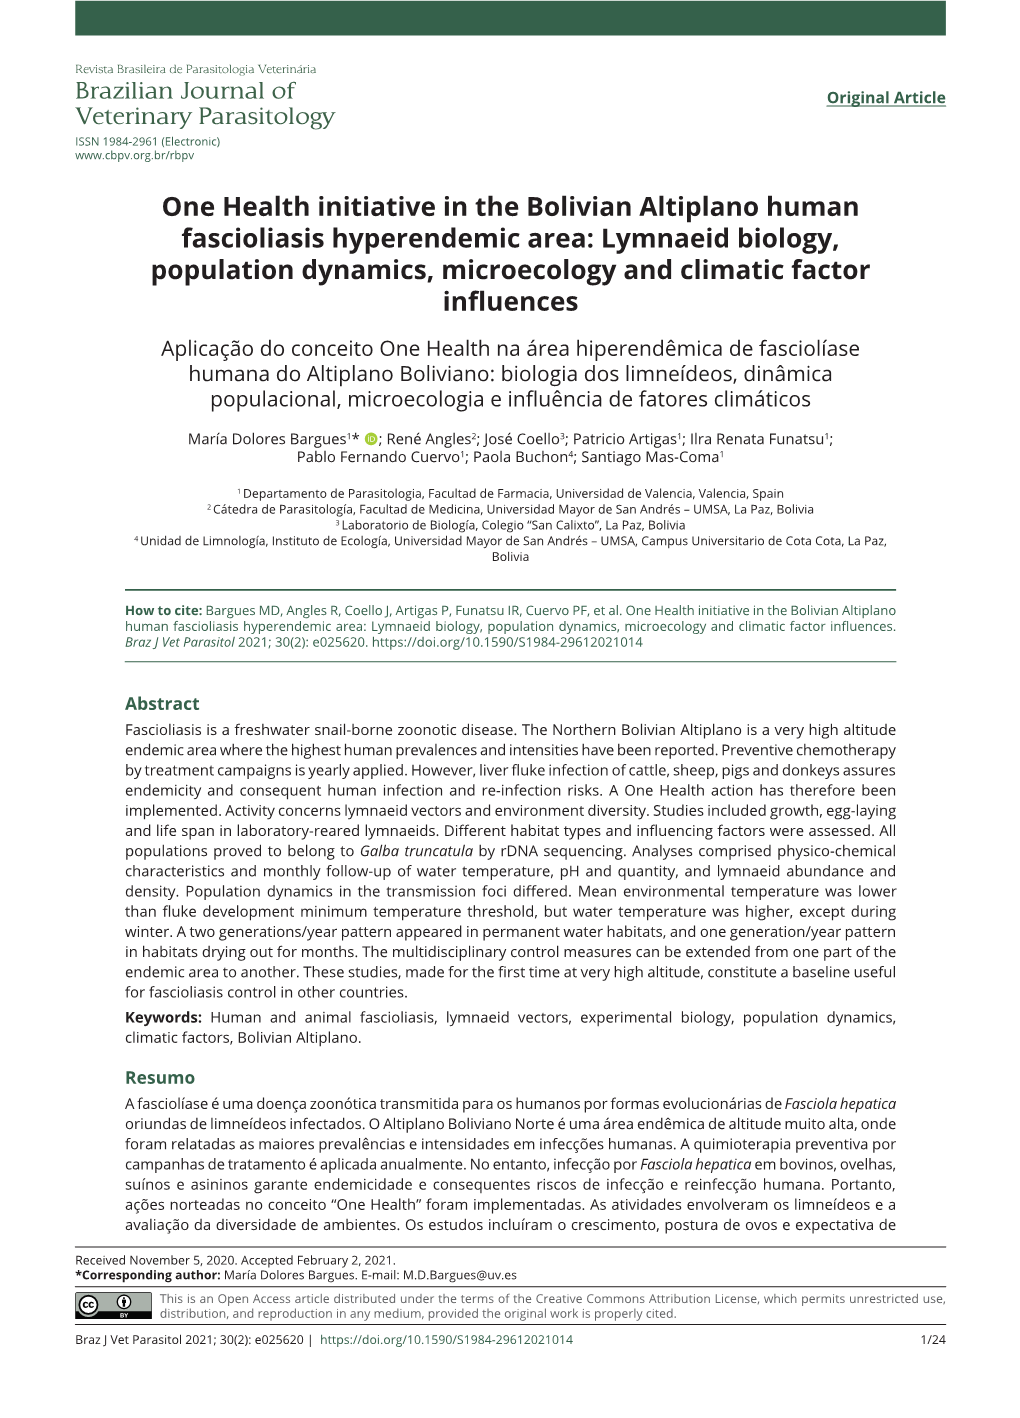 Lymnaeid Biology, Population Dynamics, Microecology and Climatic Factor Influences